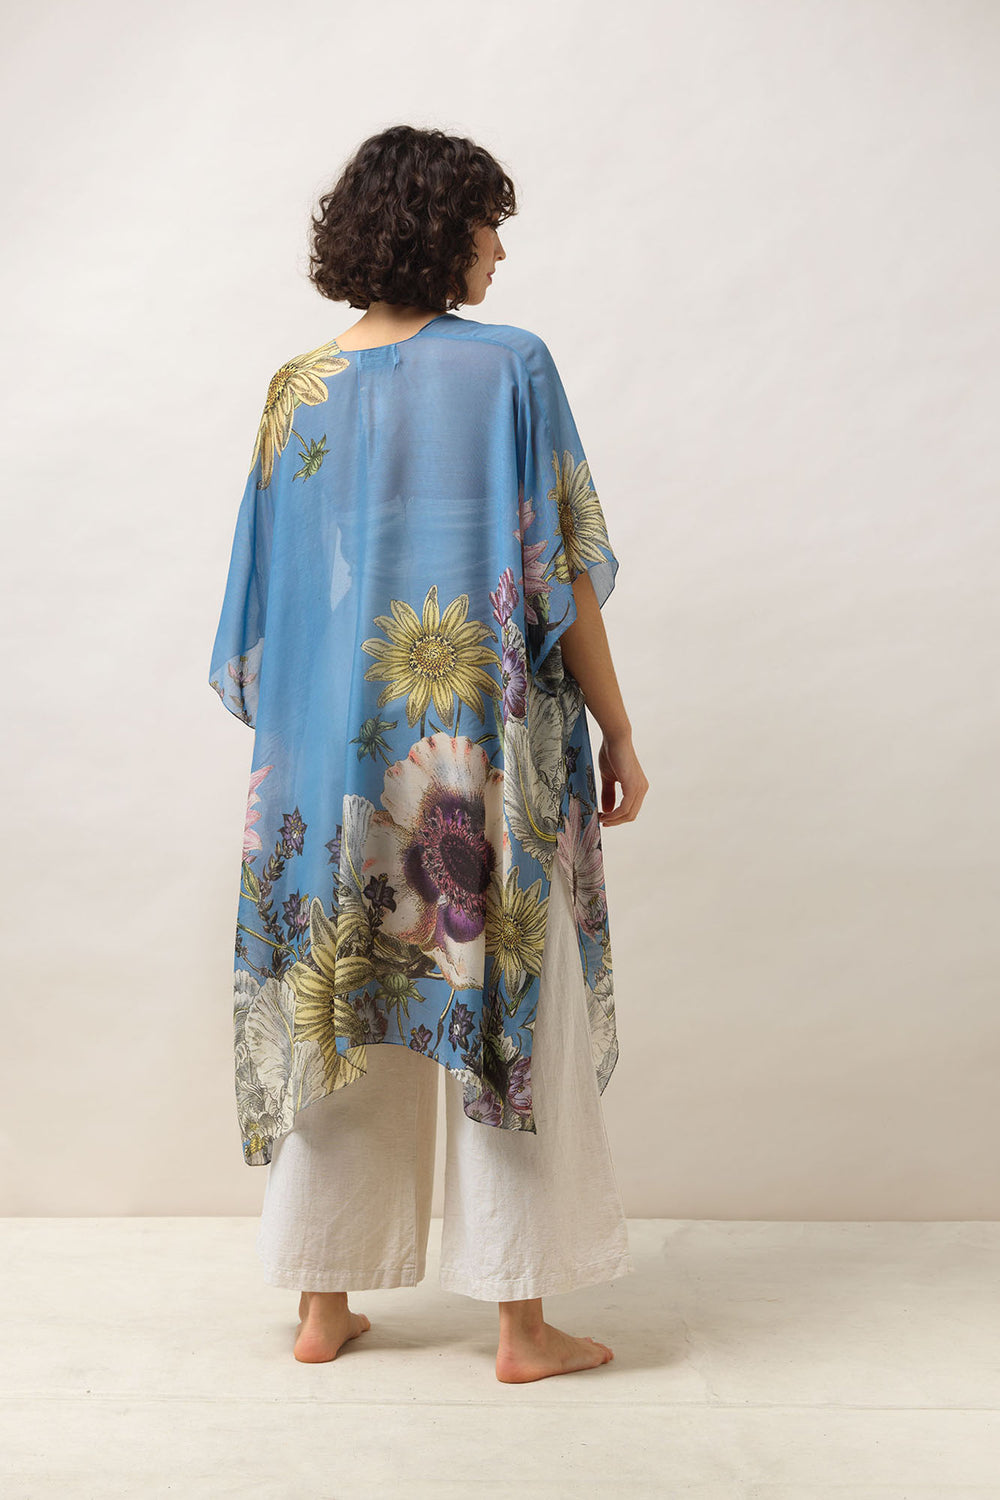 Women's lightweight throwover shawl in cornflower blue with daisy floral print by One Hundred Stars